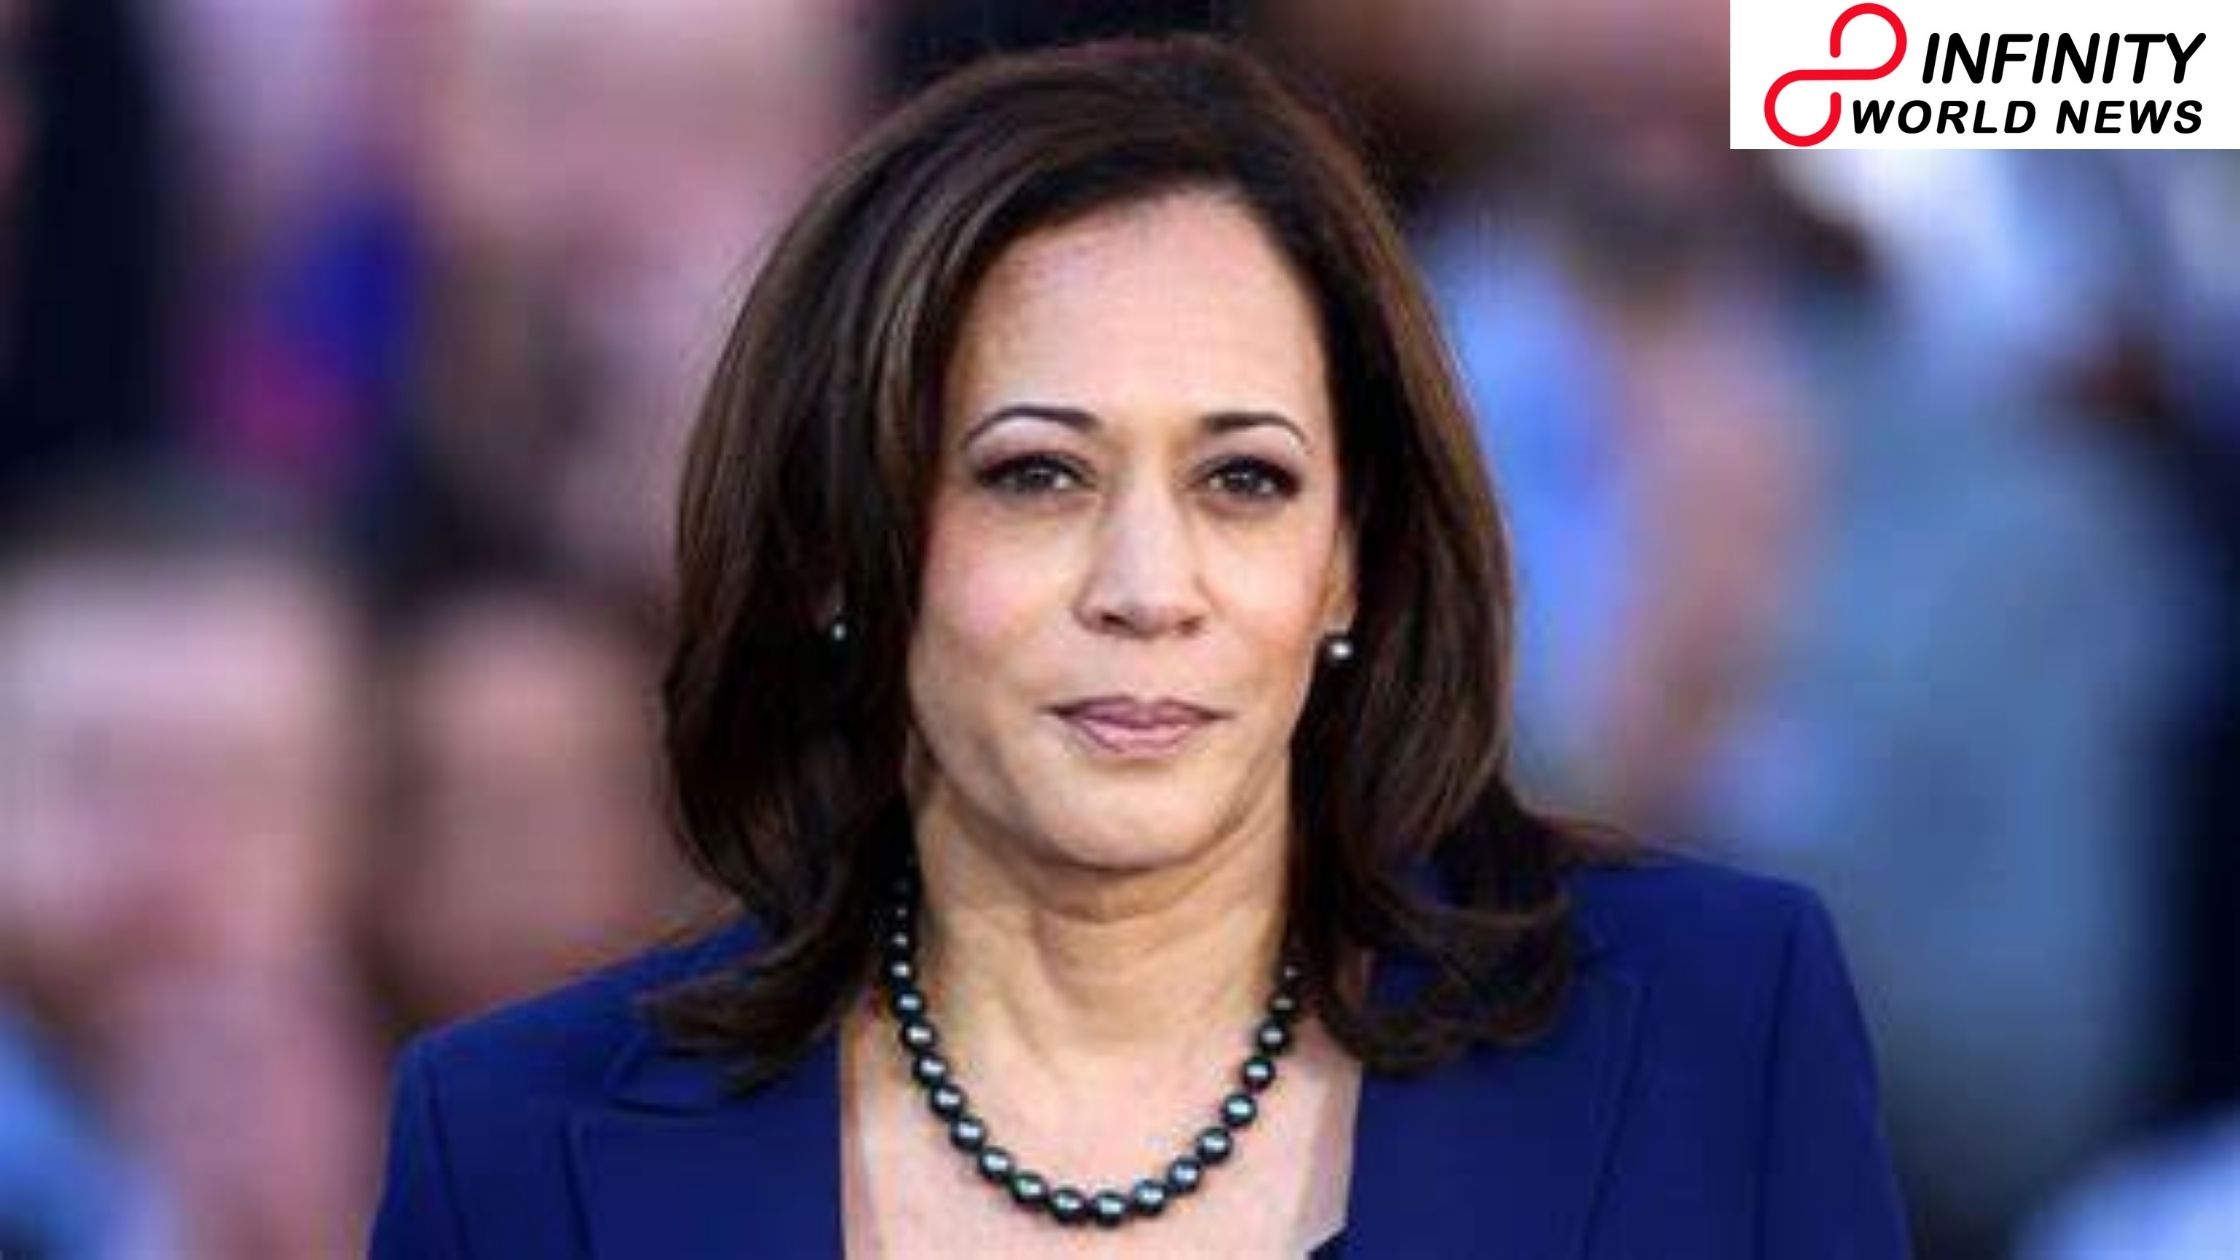 Indian Sari or Suit: What Will Kamala Harris Wear on Inauguration Day?